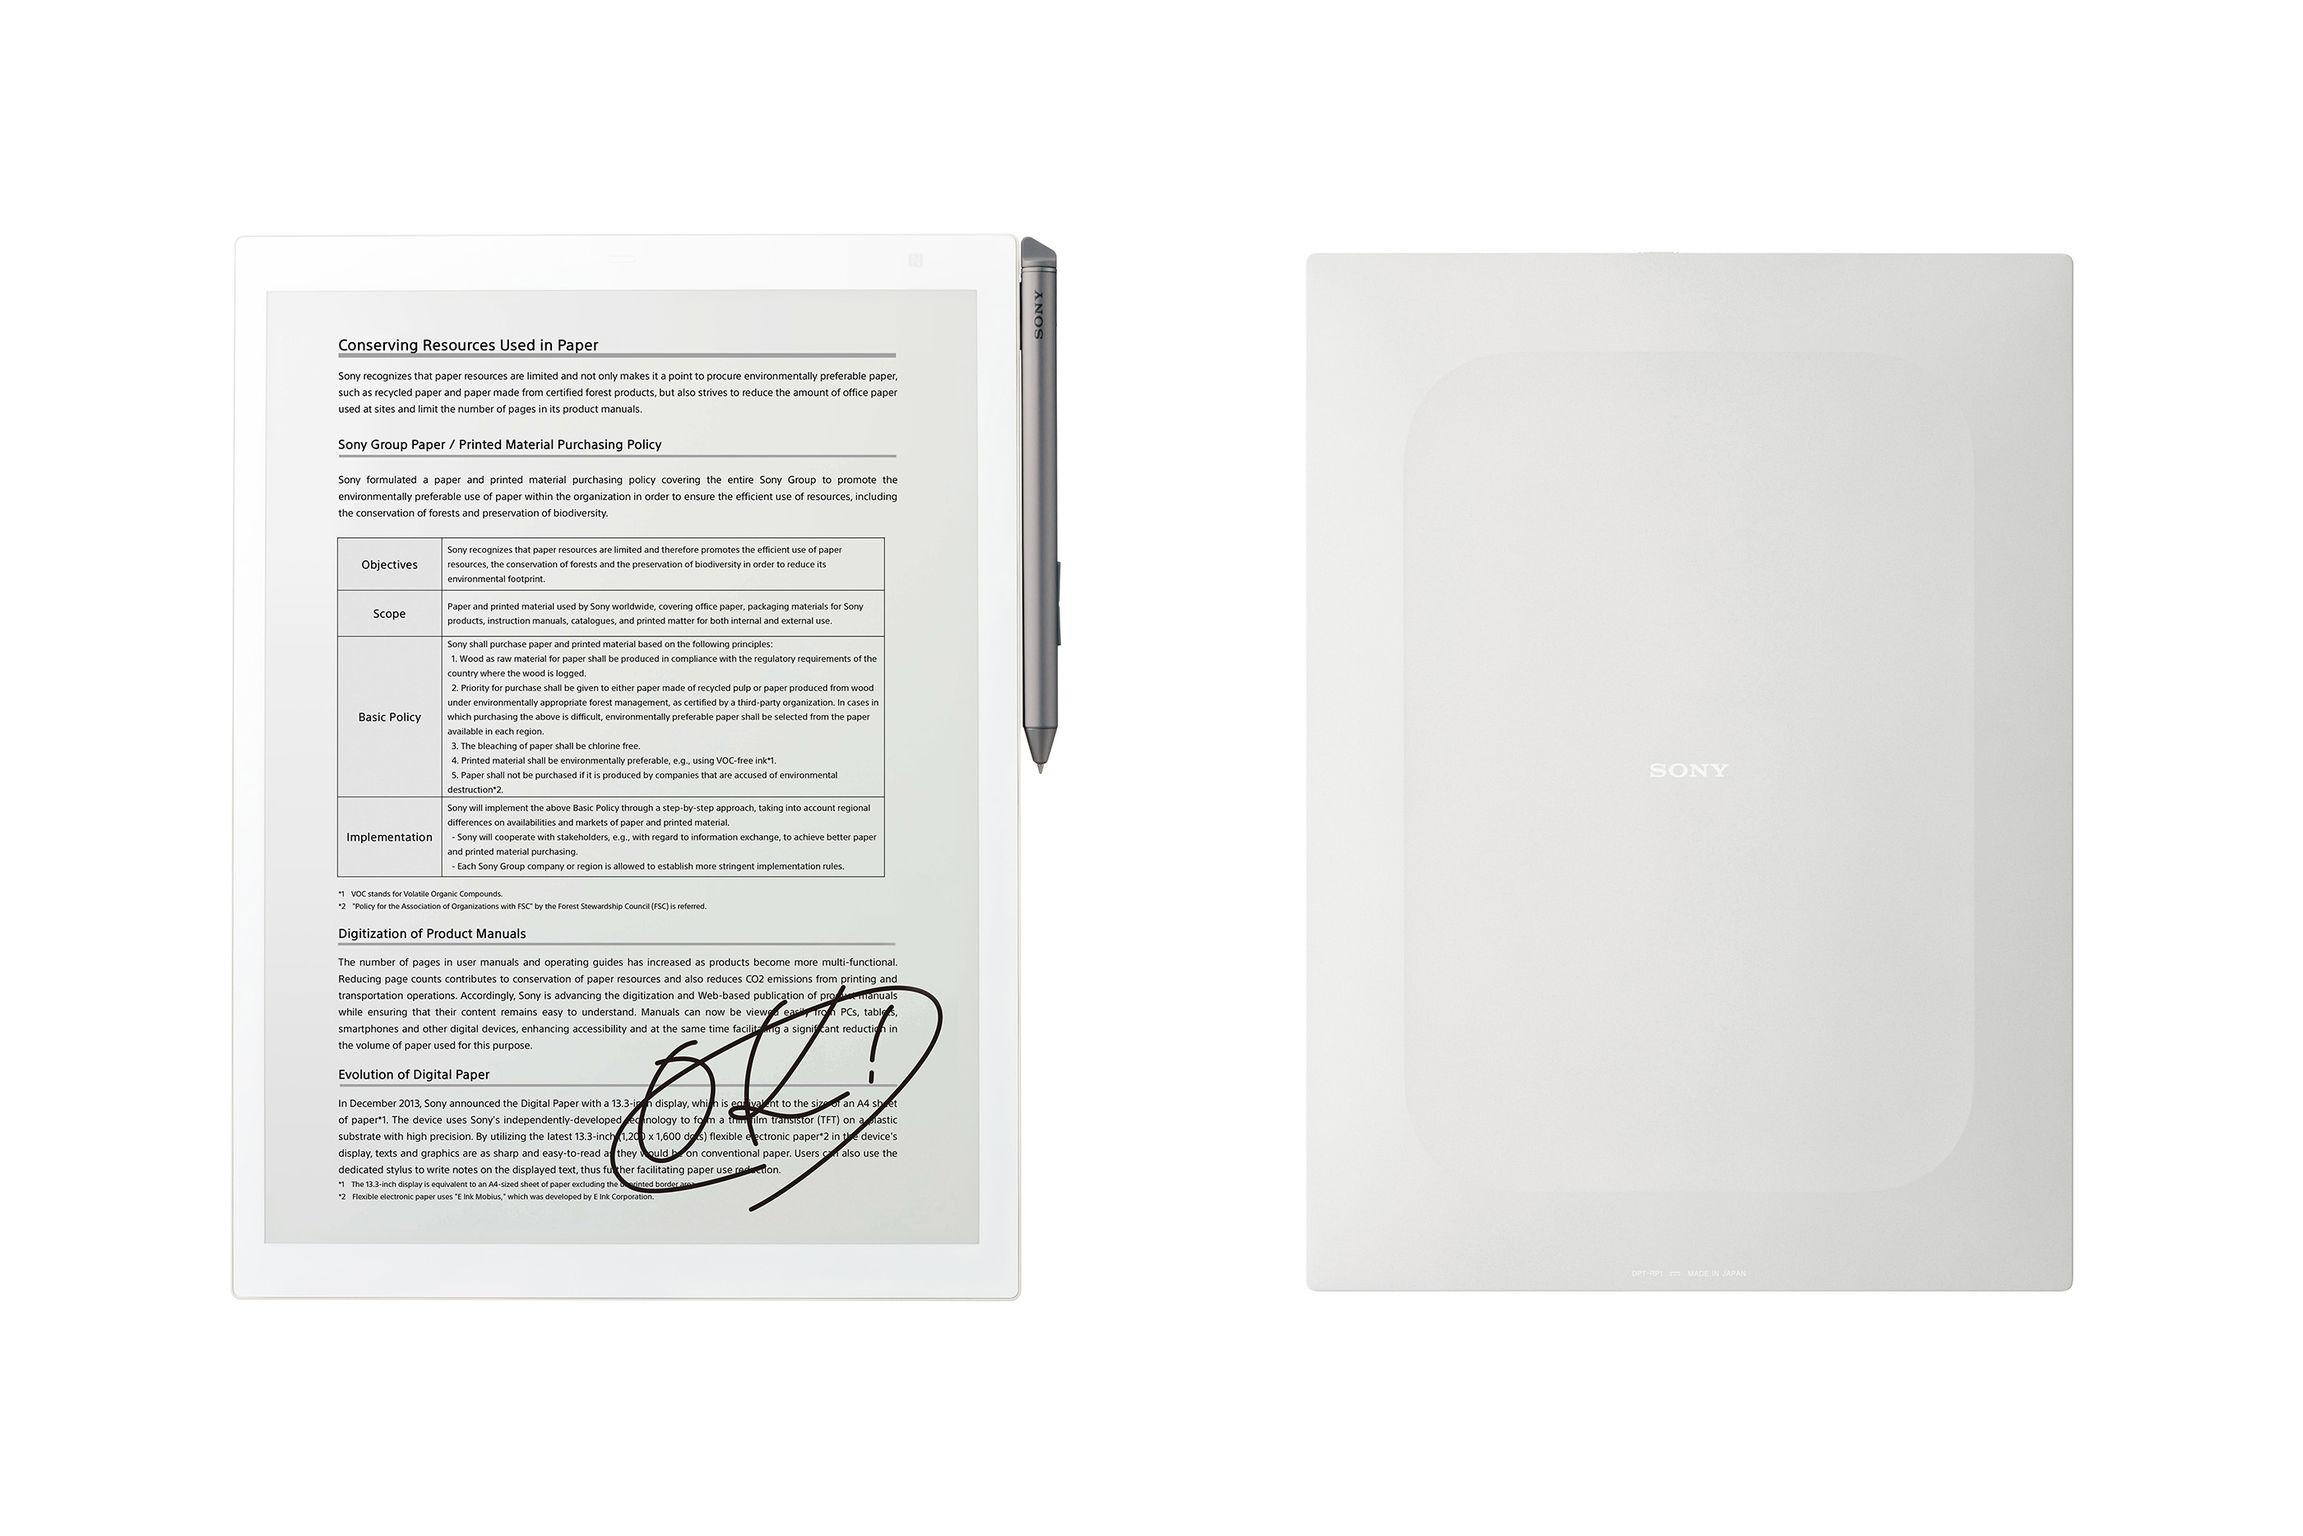 Sony Digital Paper DPT-RP1 is Discontinued in the US - Good e-Reader